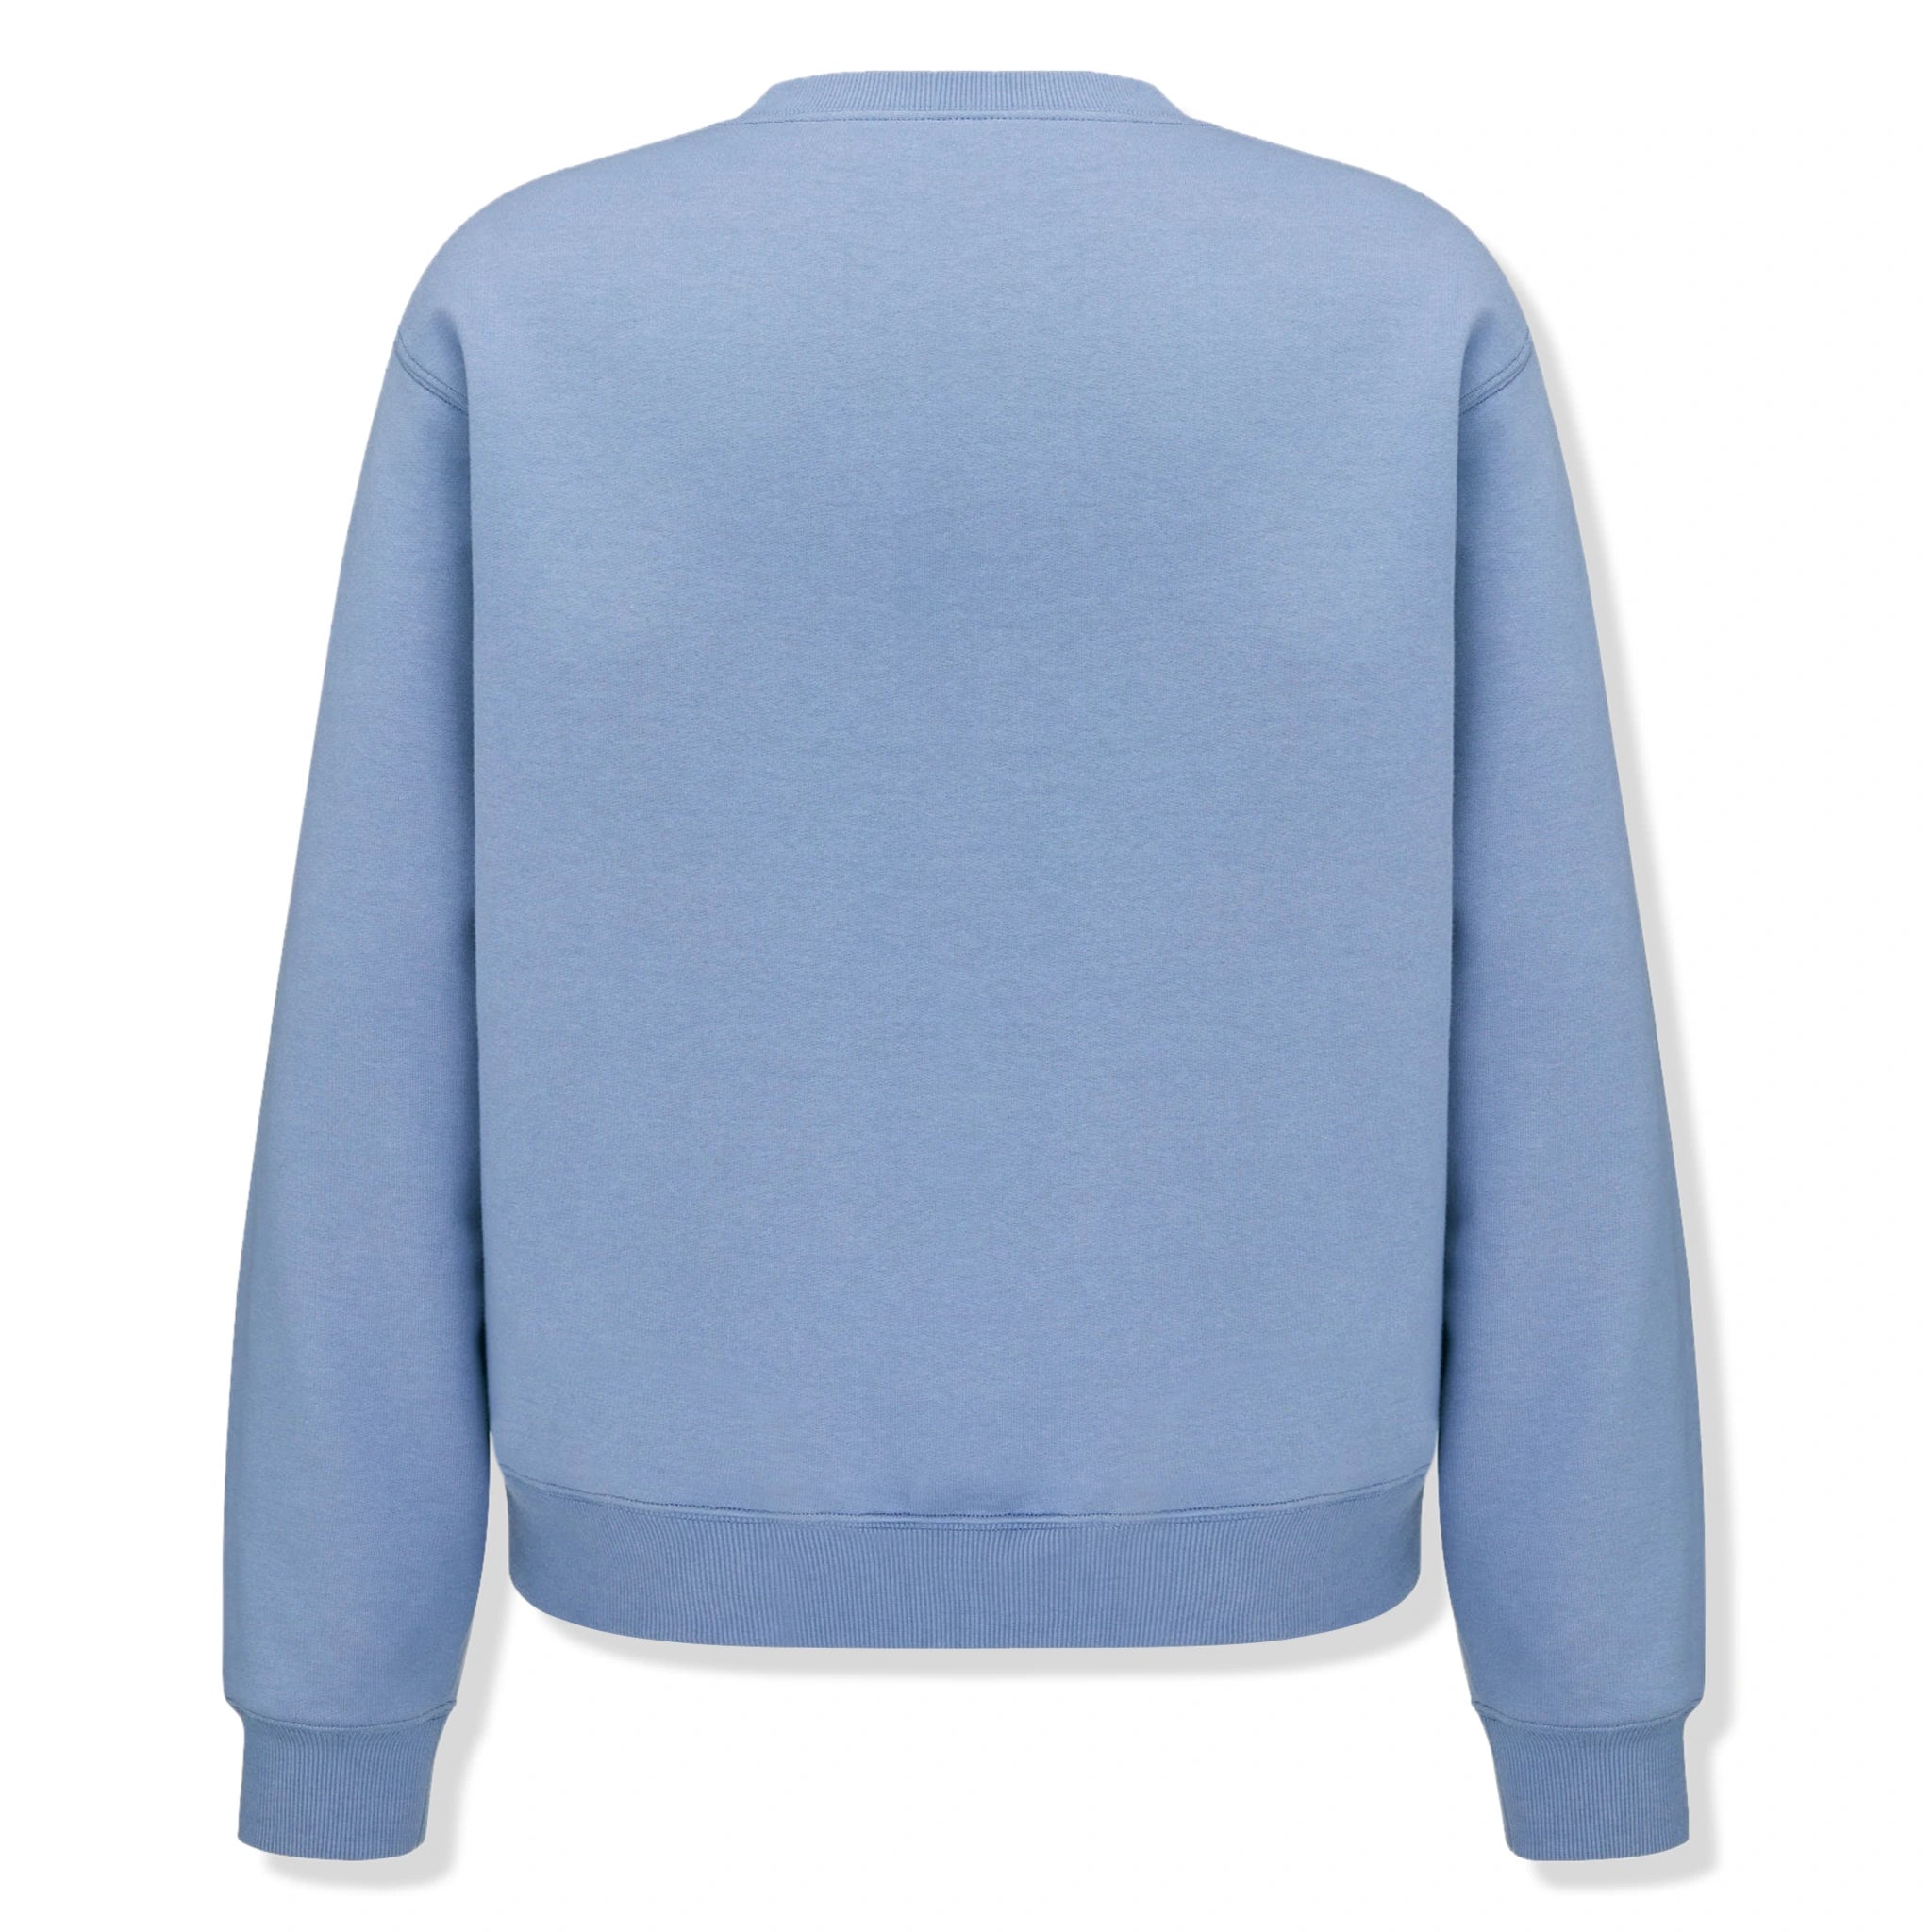 Back view of Dior 'Christian Dior Couture' Relaxed Fit Blue Sweatshirt 343J694A0531_C580